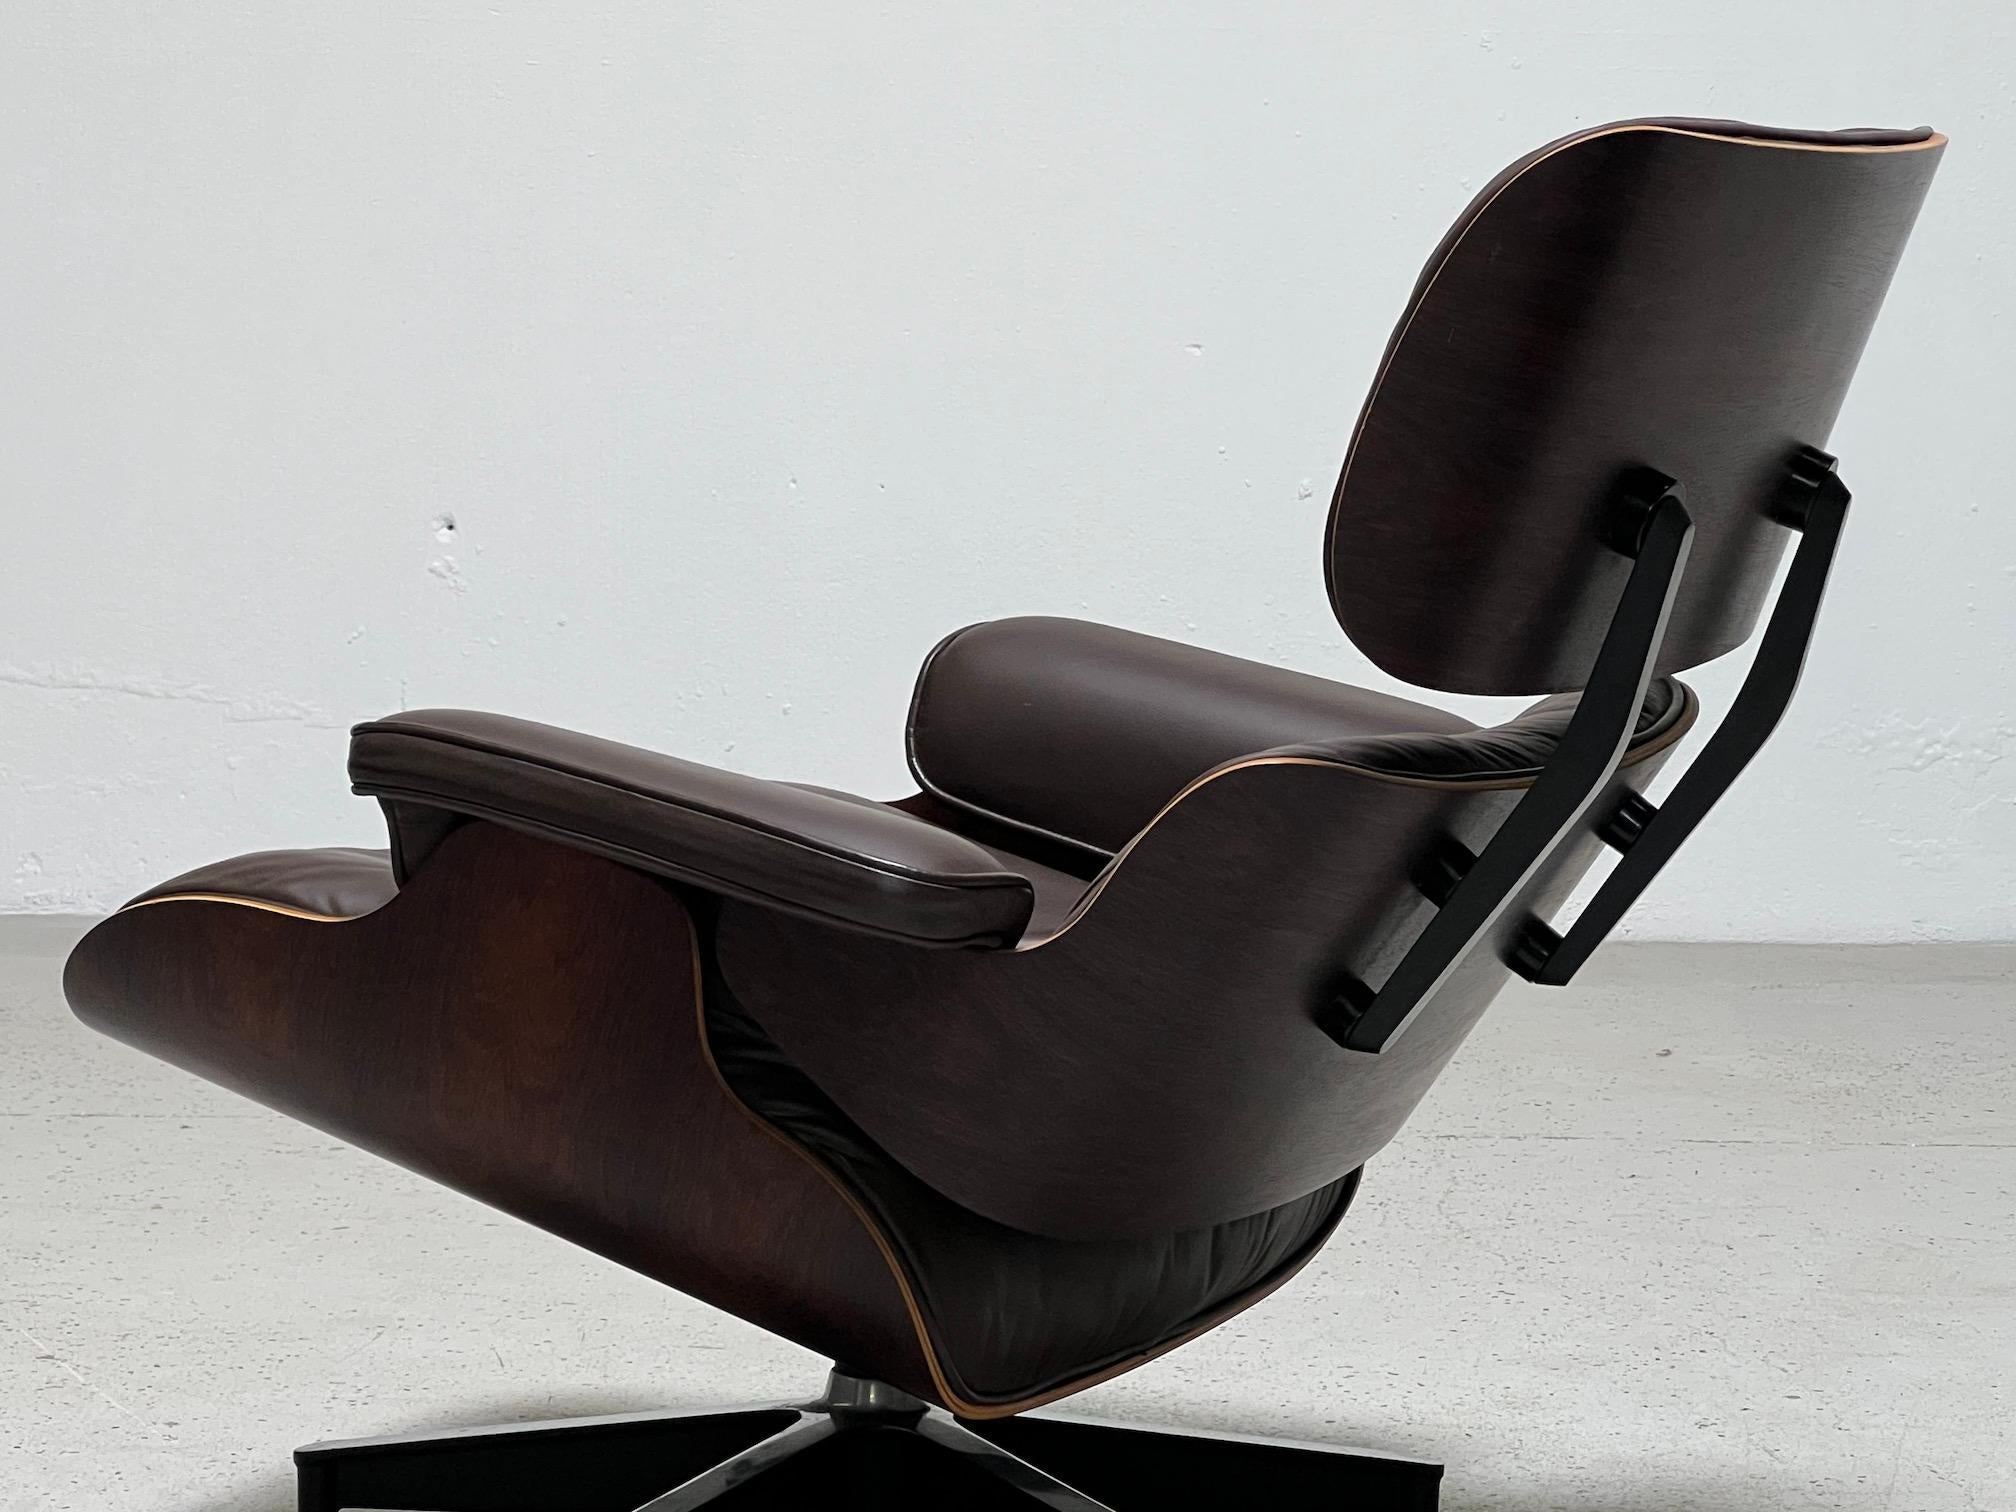 Charles Eames for Herman Miller Lounge Chair and Ottoman 8